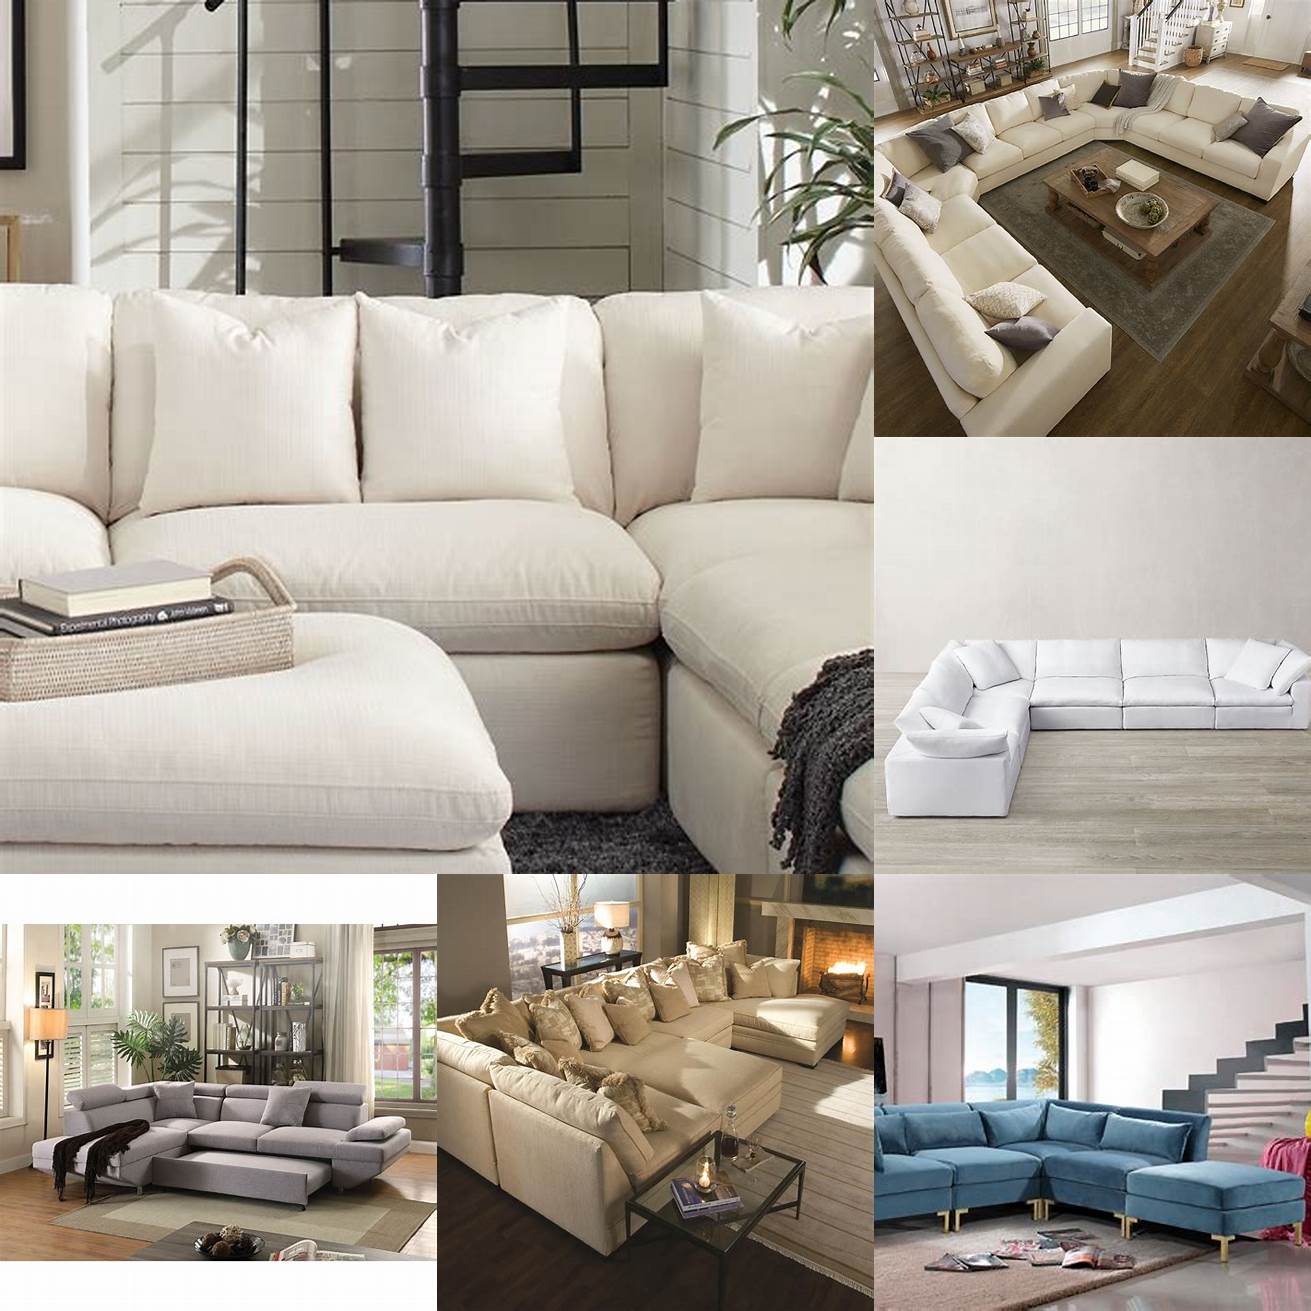 Image 6 A white-colored large sectional sofa with a modular design and adjustable headrests